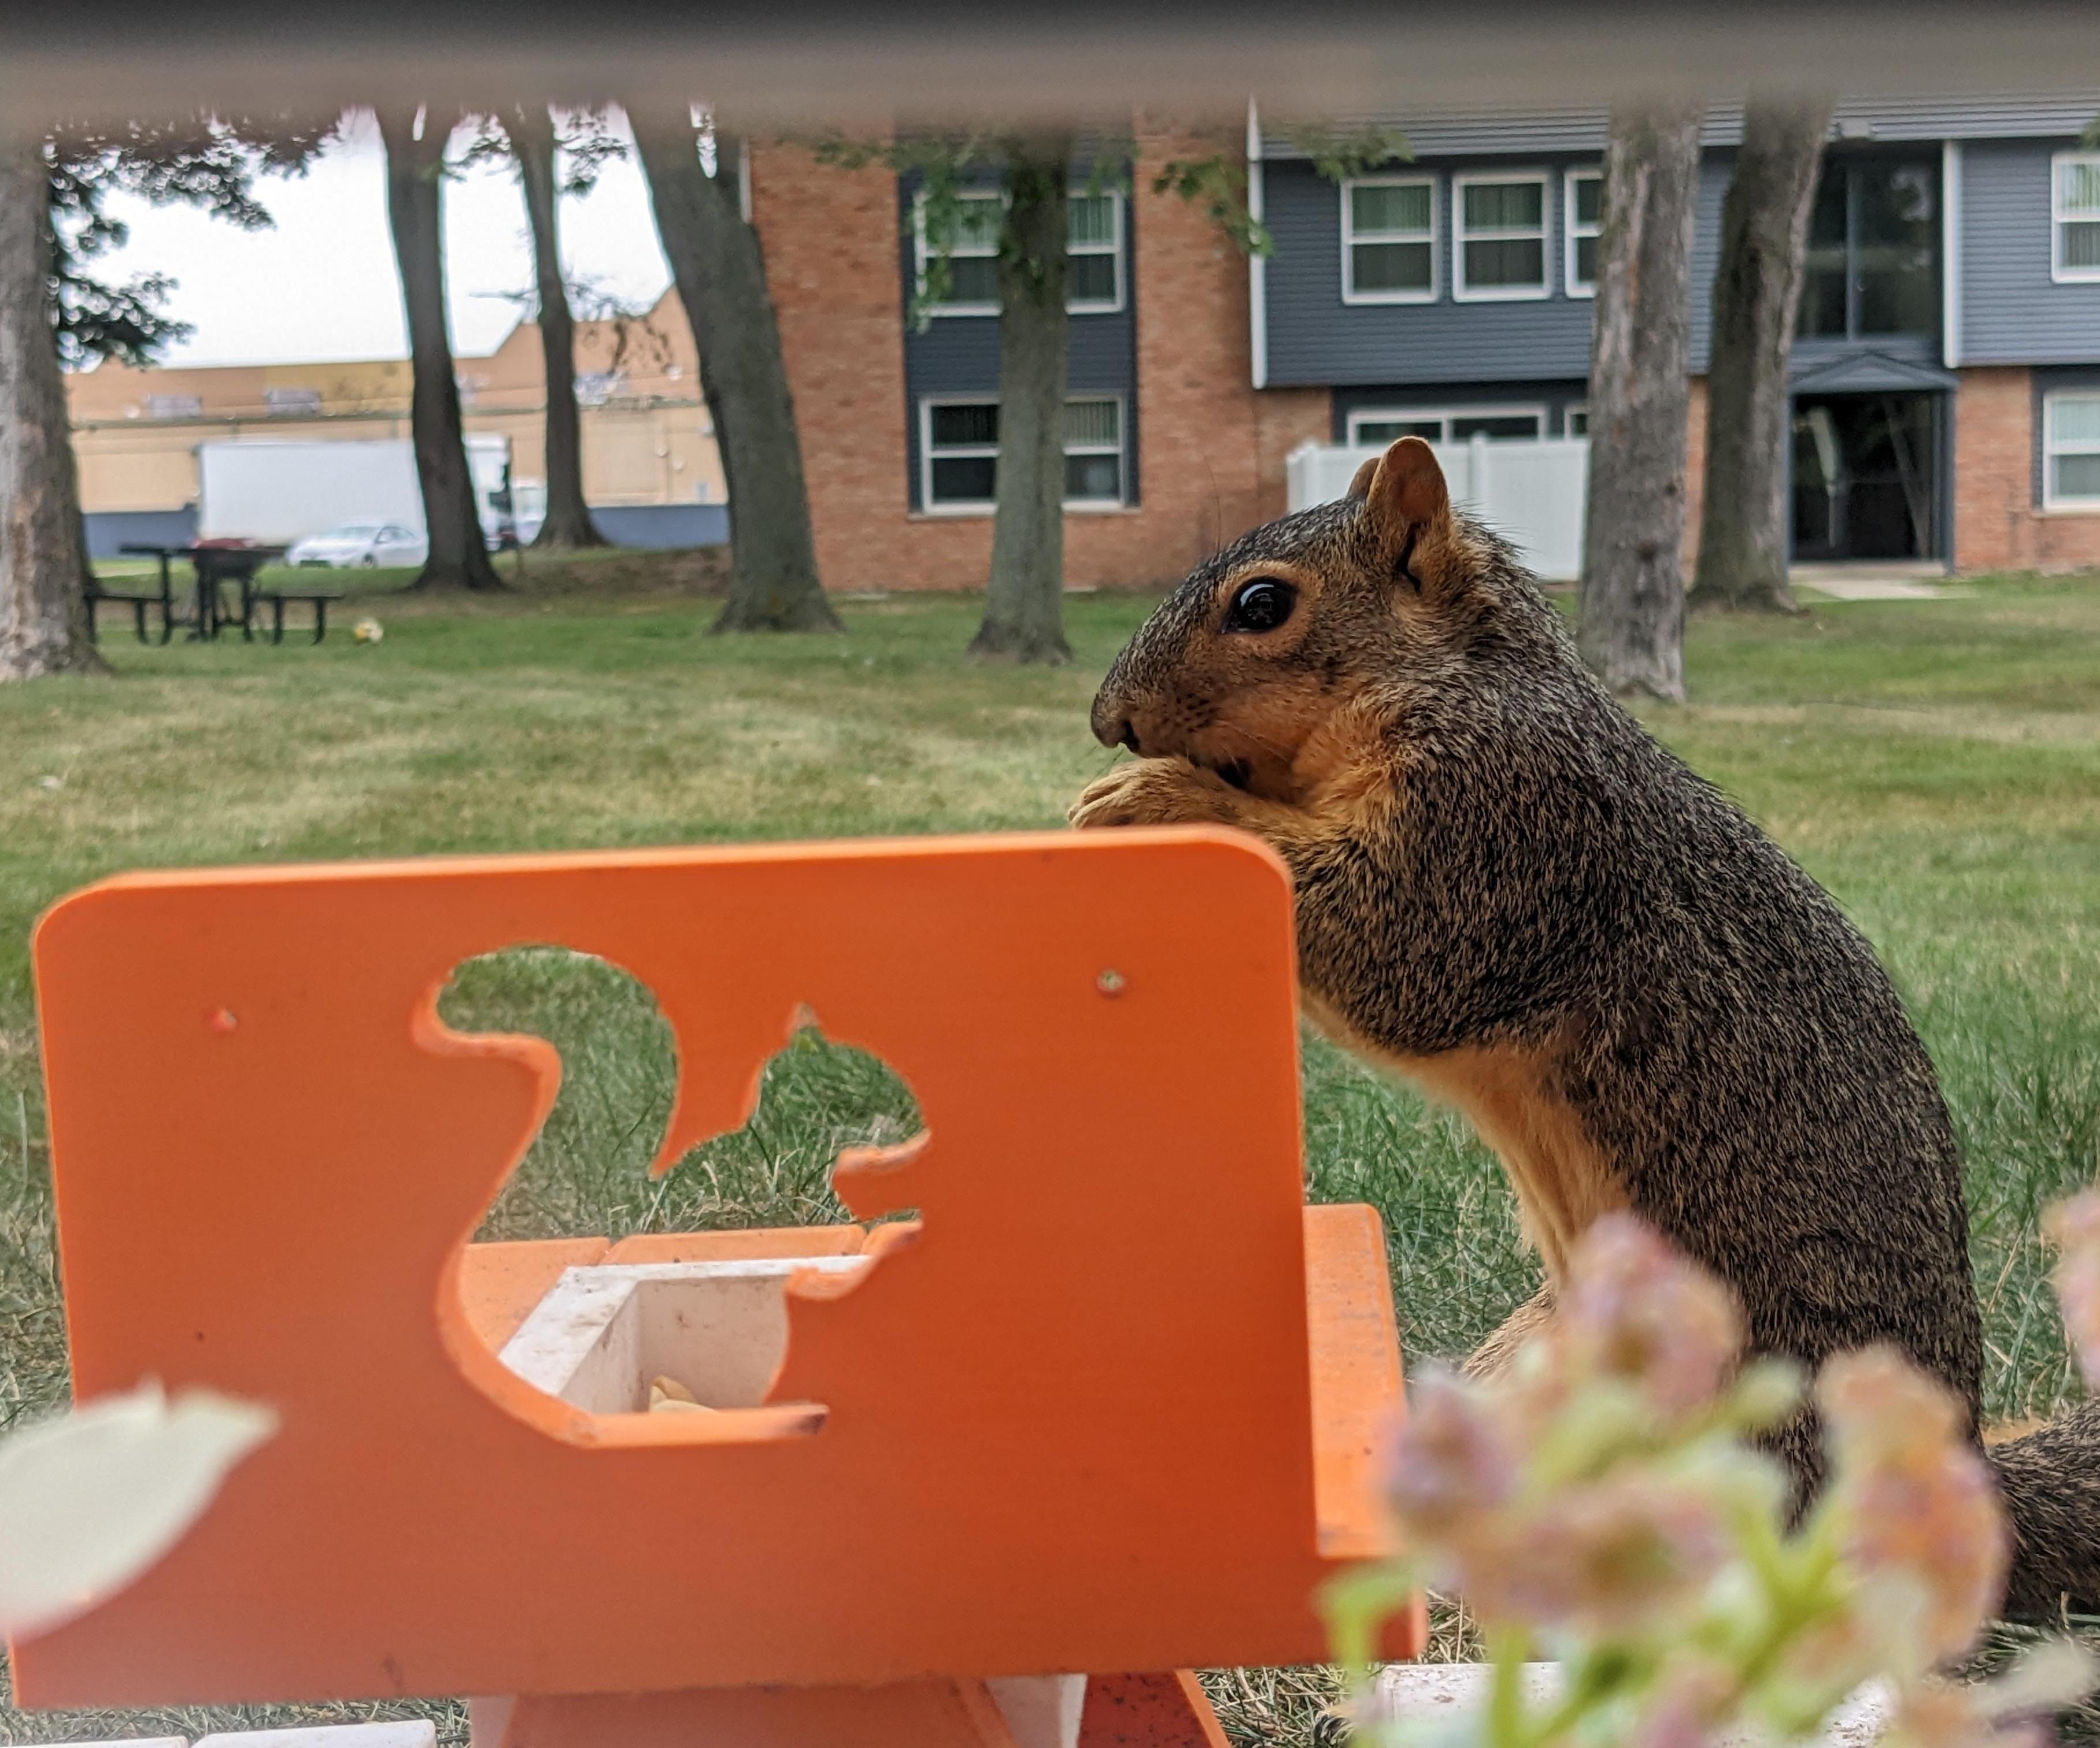 Making a Squirrel Cafe